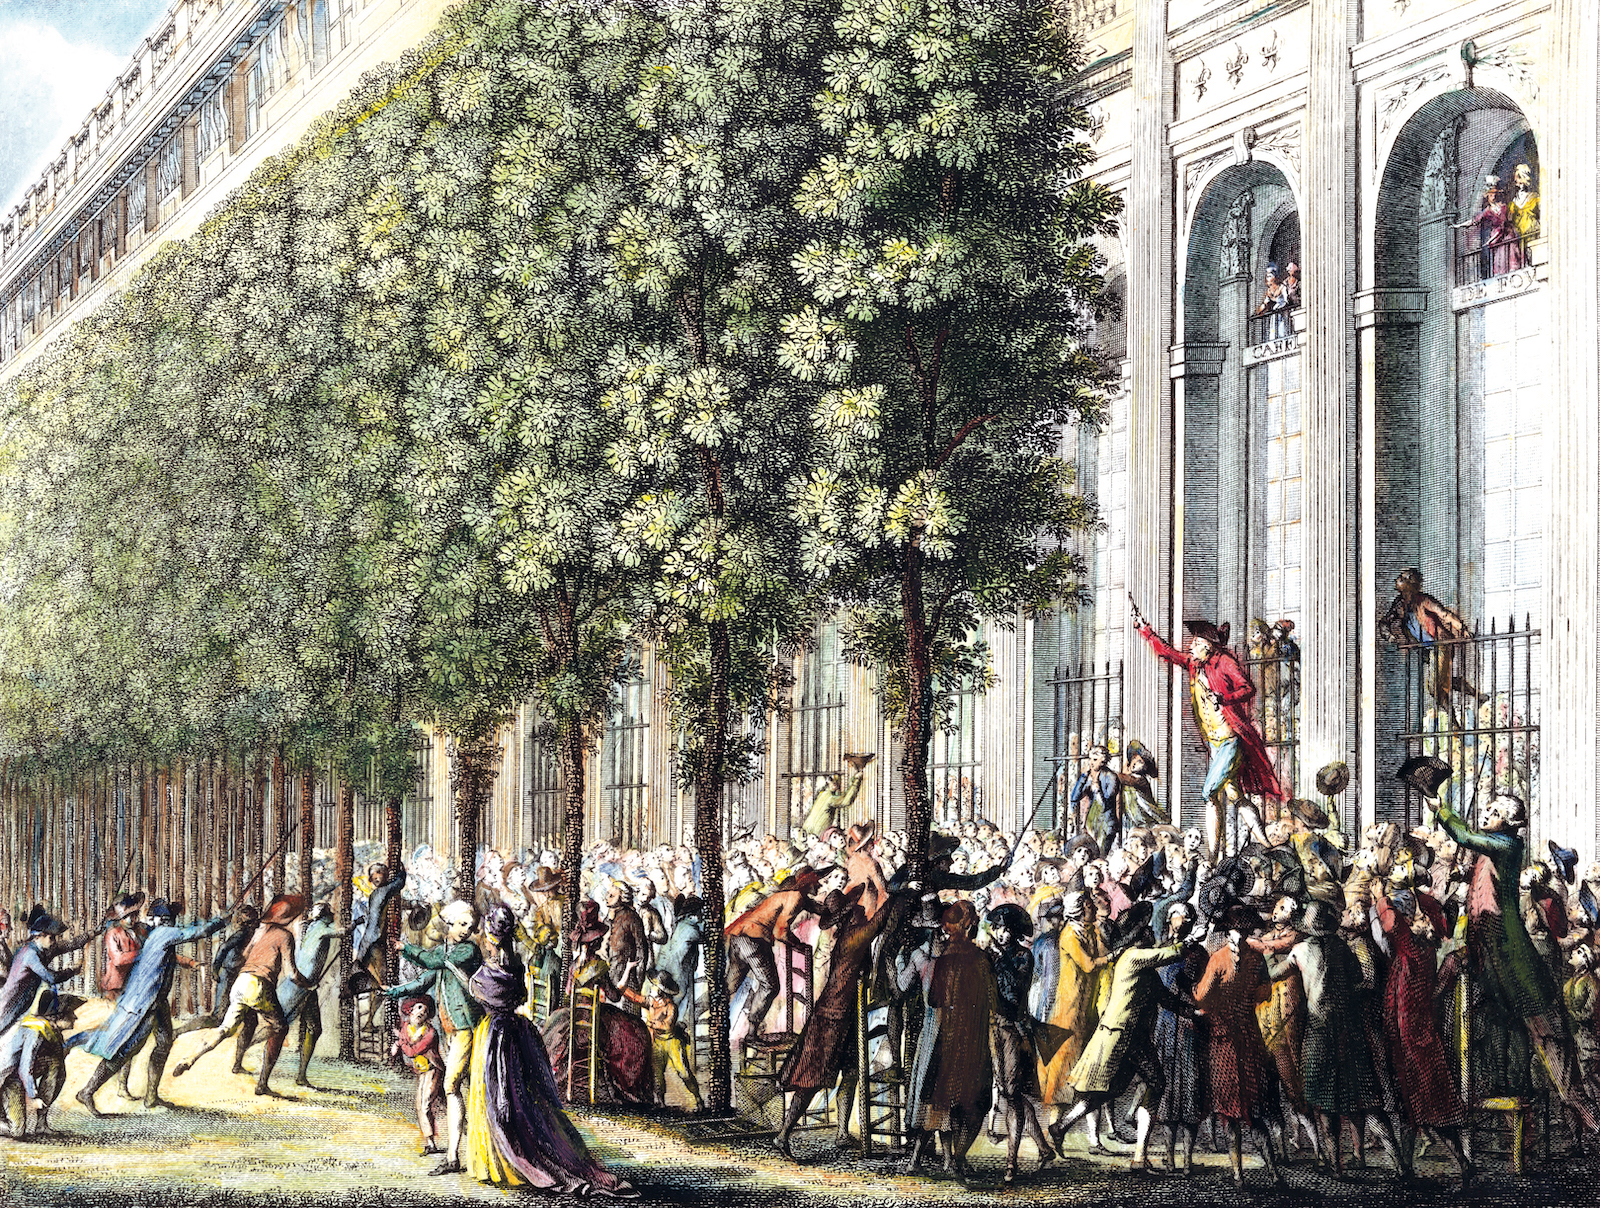 Throwing shade: Camille Desmoulins speaks at the Palais-Royal on 12 July 1789, two days before the taking  of the Bastille, by Jean-Louis Prieur, c.1790. Alamy Stock Photo.